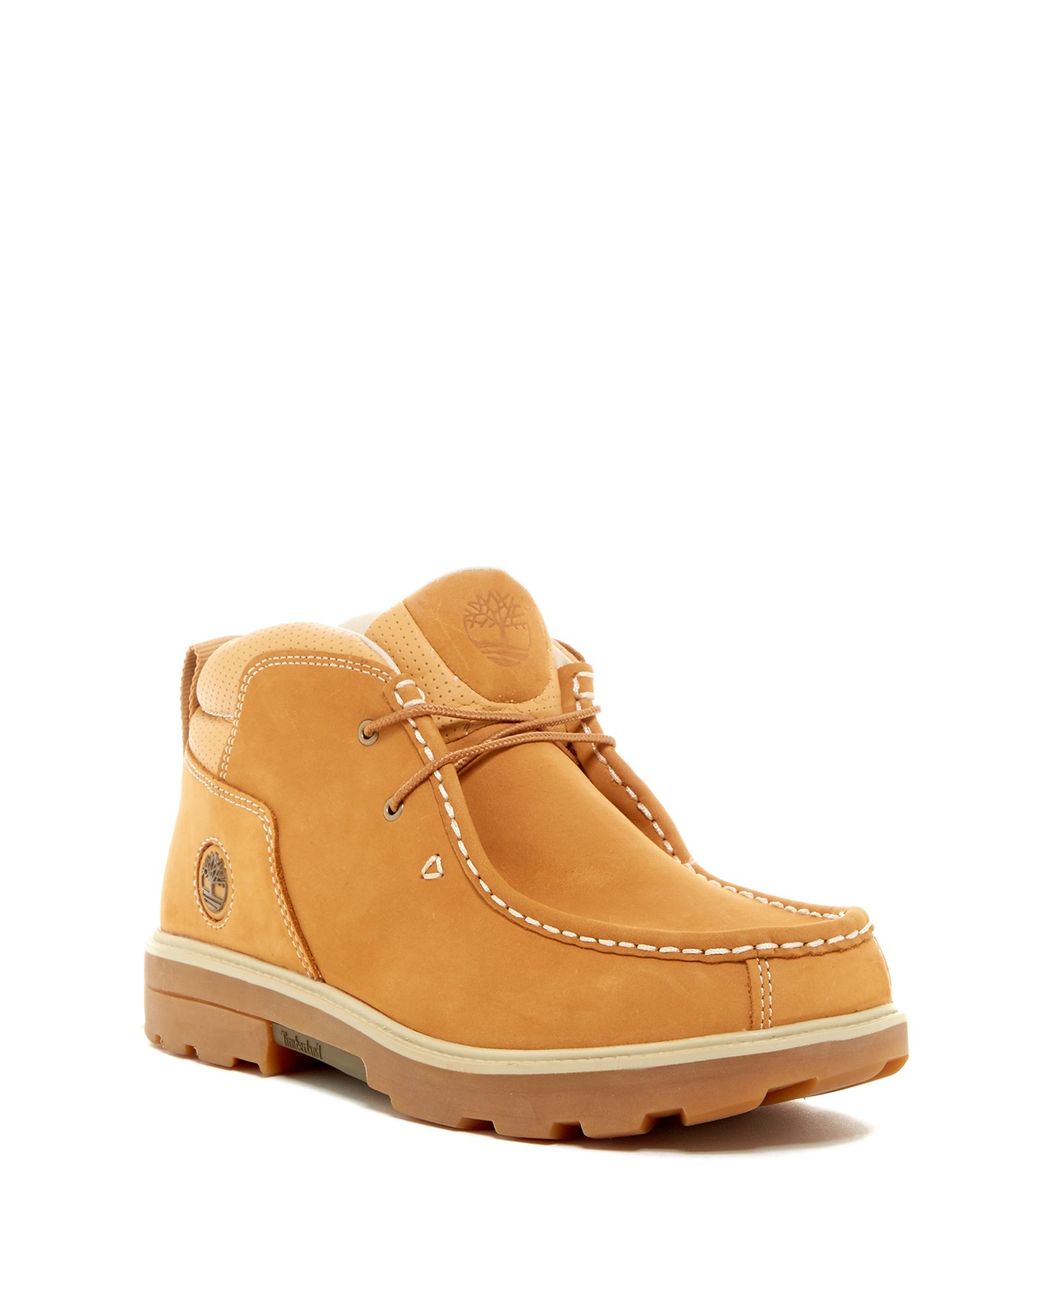 Timberland Leather Rugged Street 2 Chukka Boot in Yellow (Brown) | Lyst